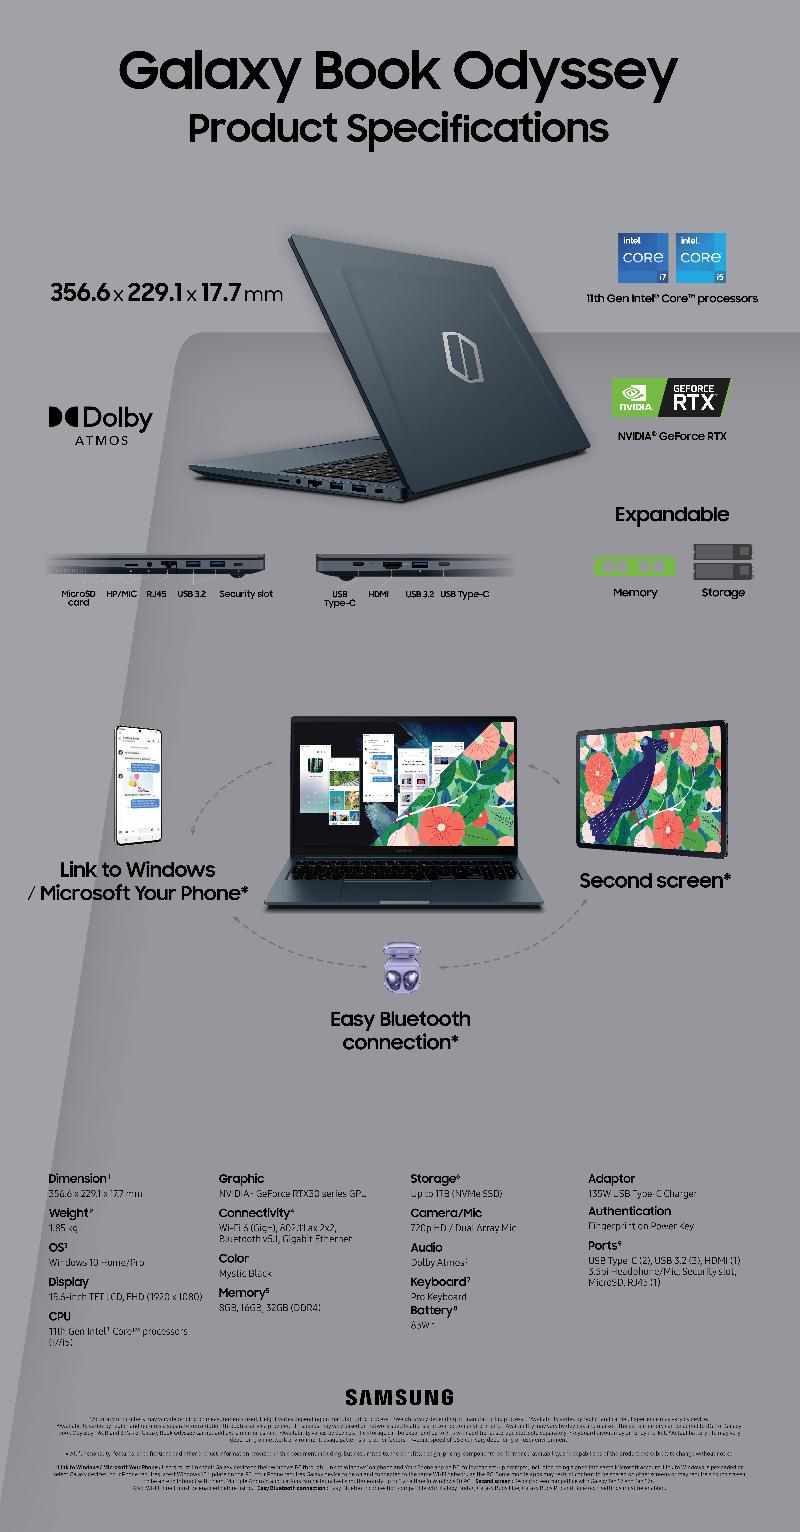 galaxy_book_odyssey_product_specifications-1.jpg